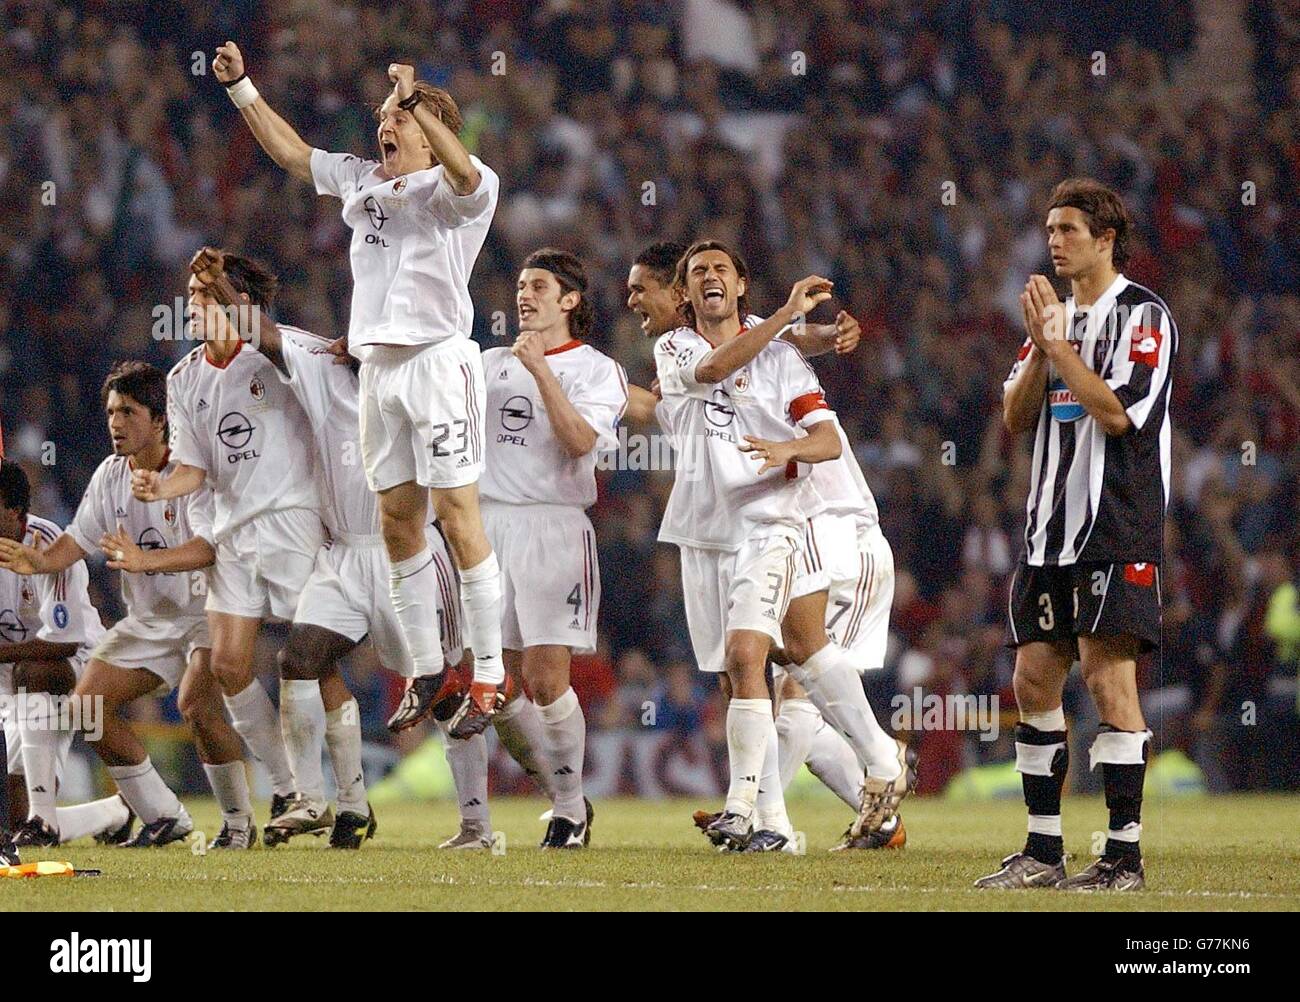 Delight for AC Milan as they win the UEFA Champions League Final and despair for Juventus the beaten finalists at Old Trafford, Manchester. Stock Photo